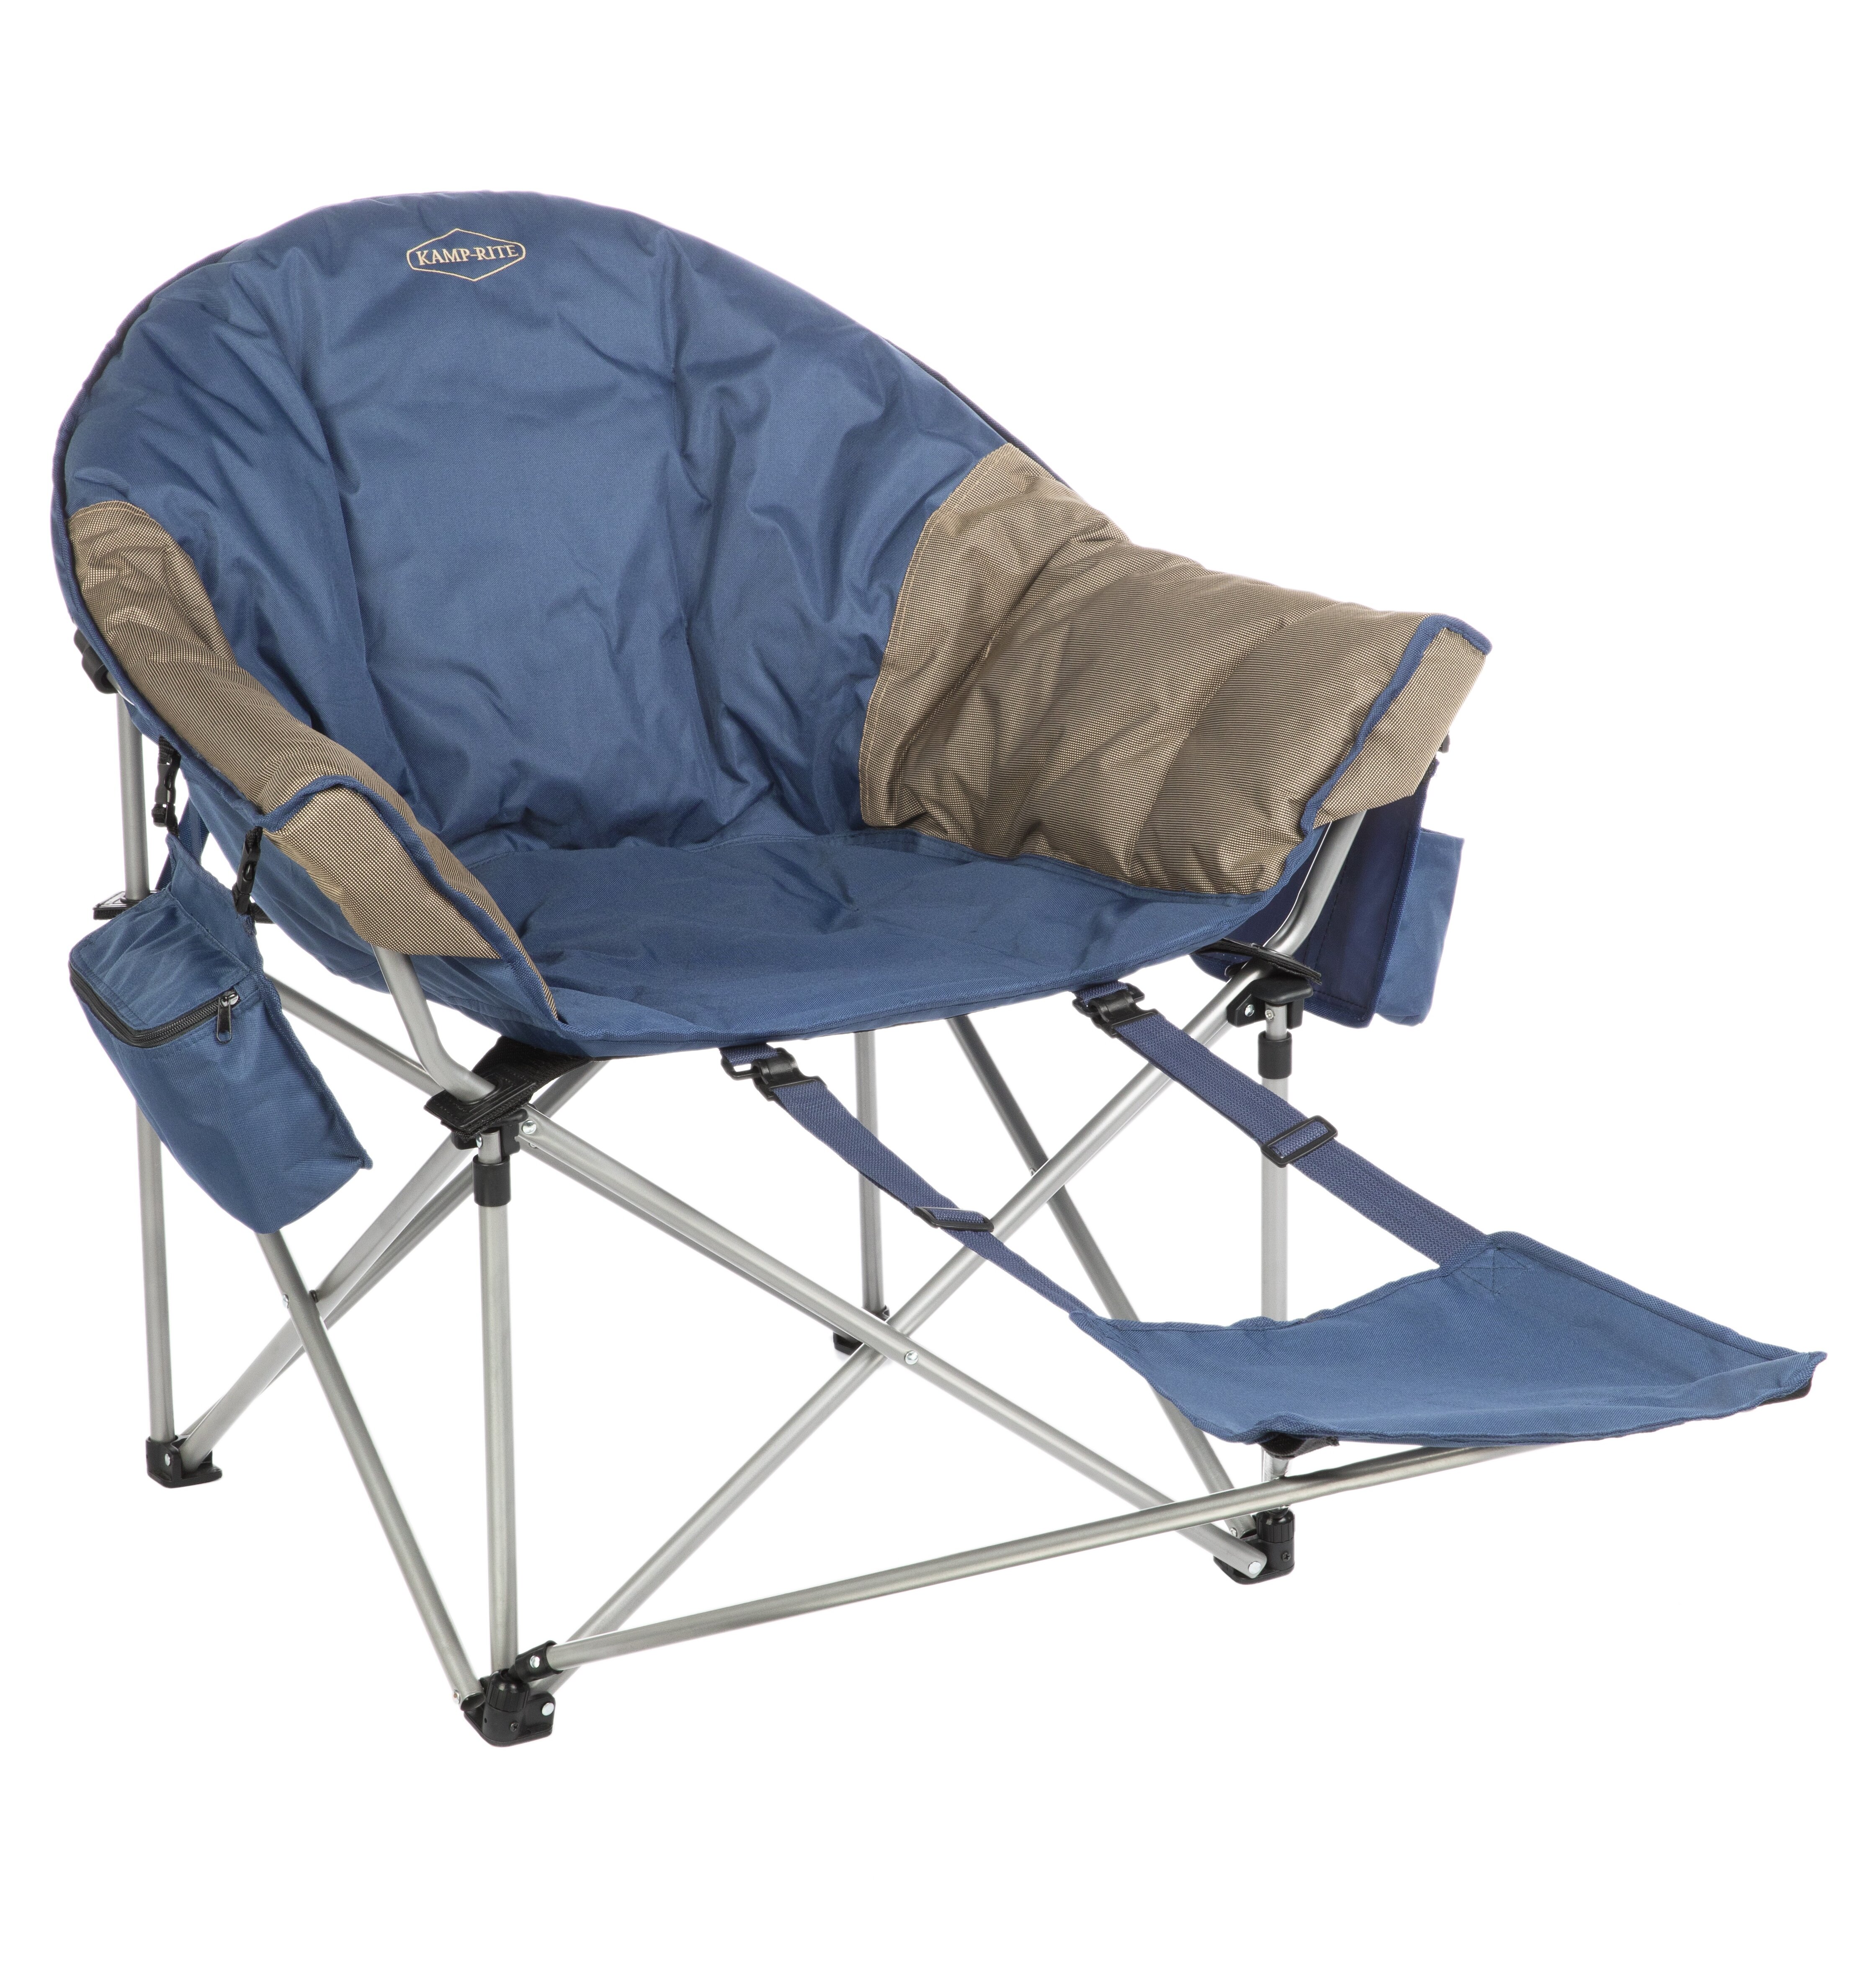 folding footrest camping